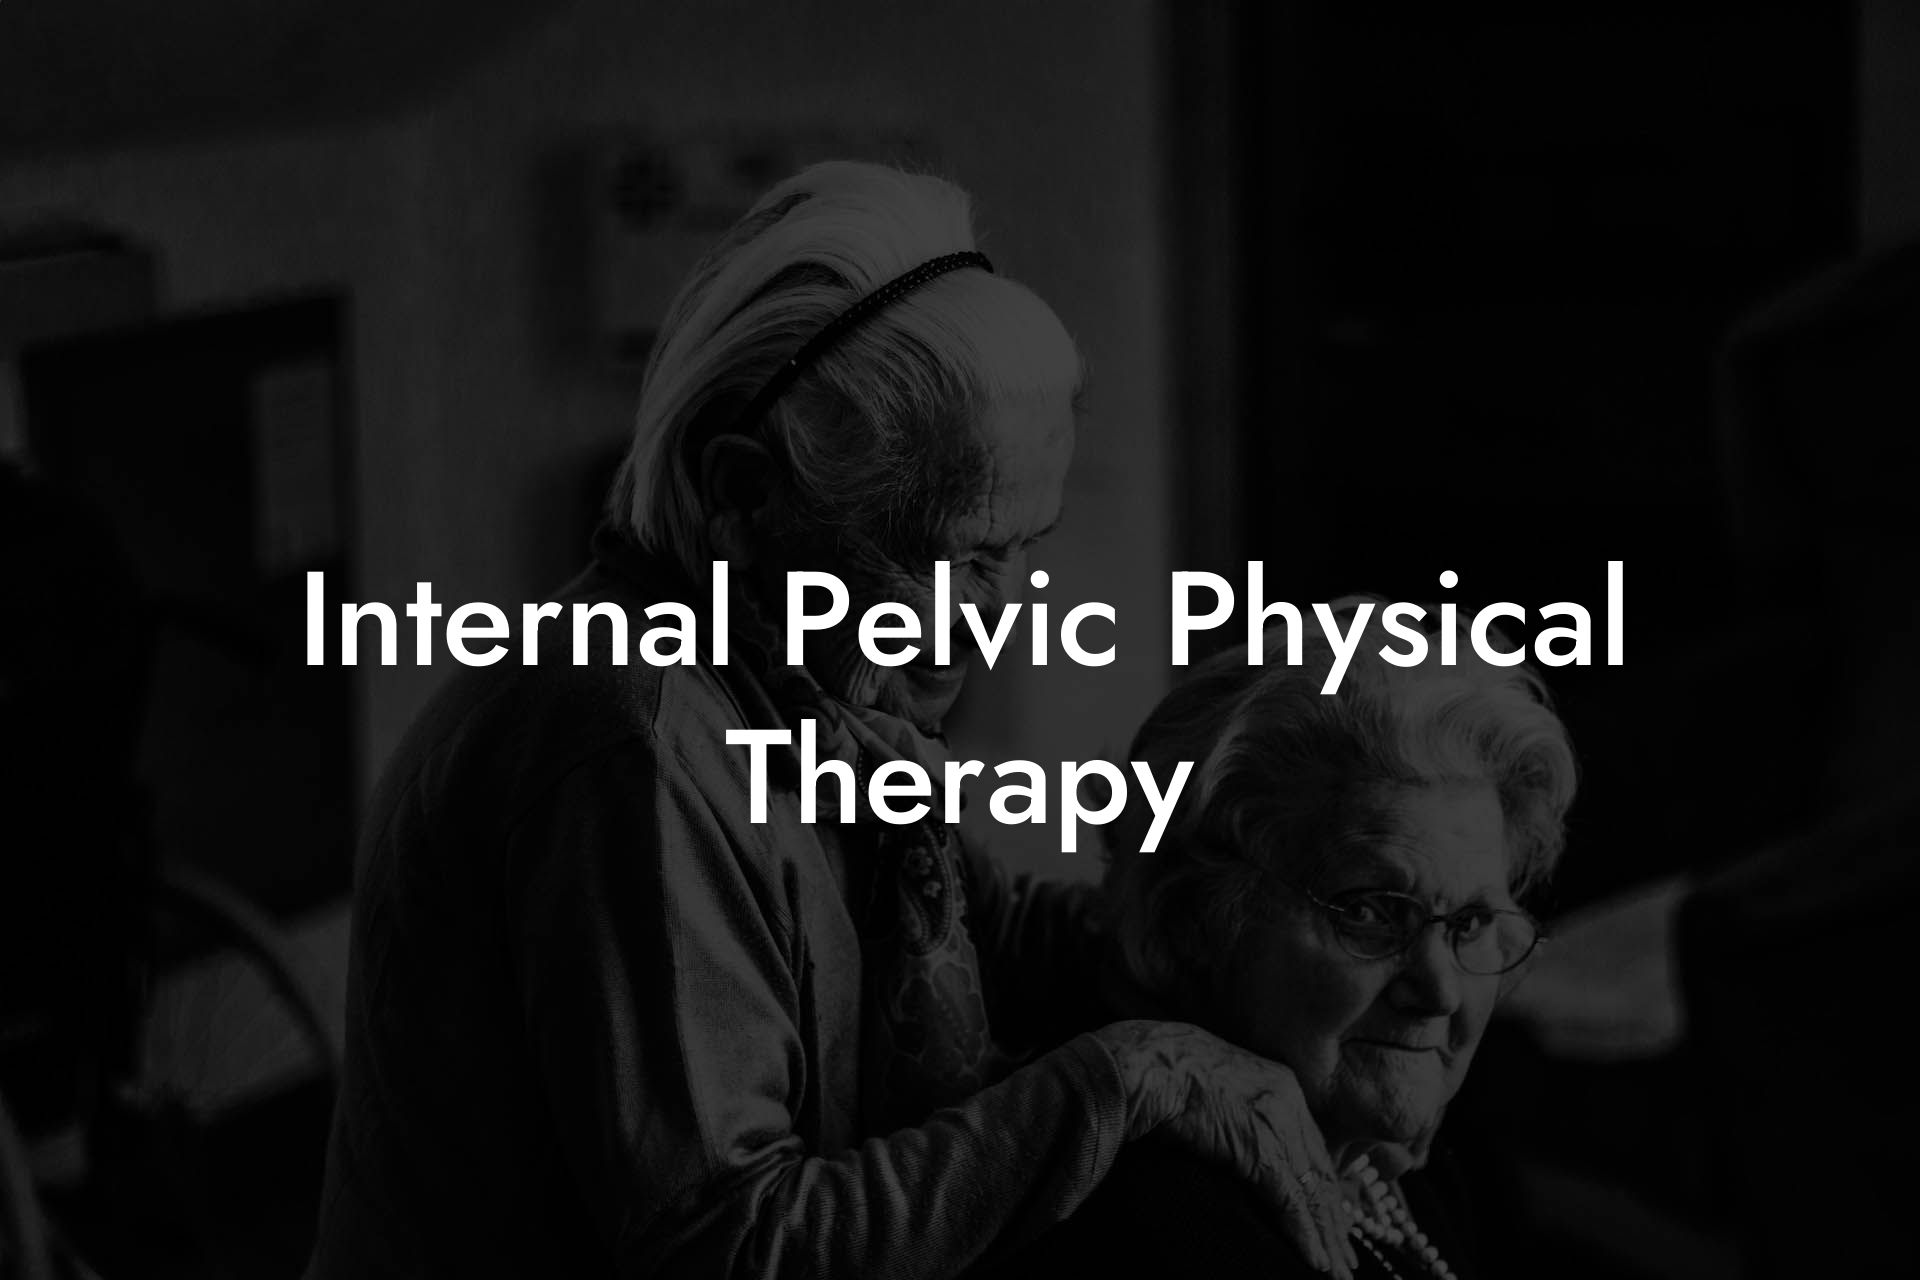 Internal Pelvic Physical Therapy